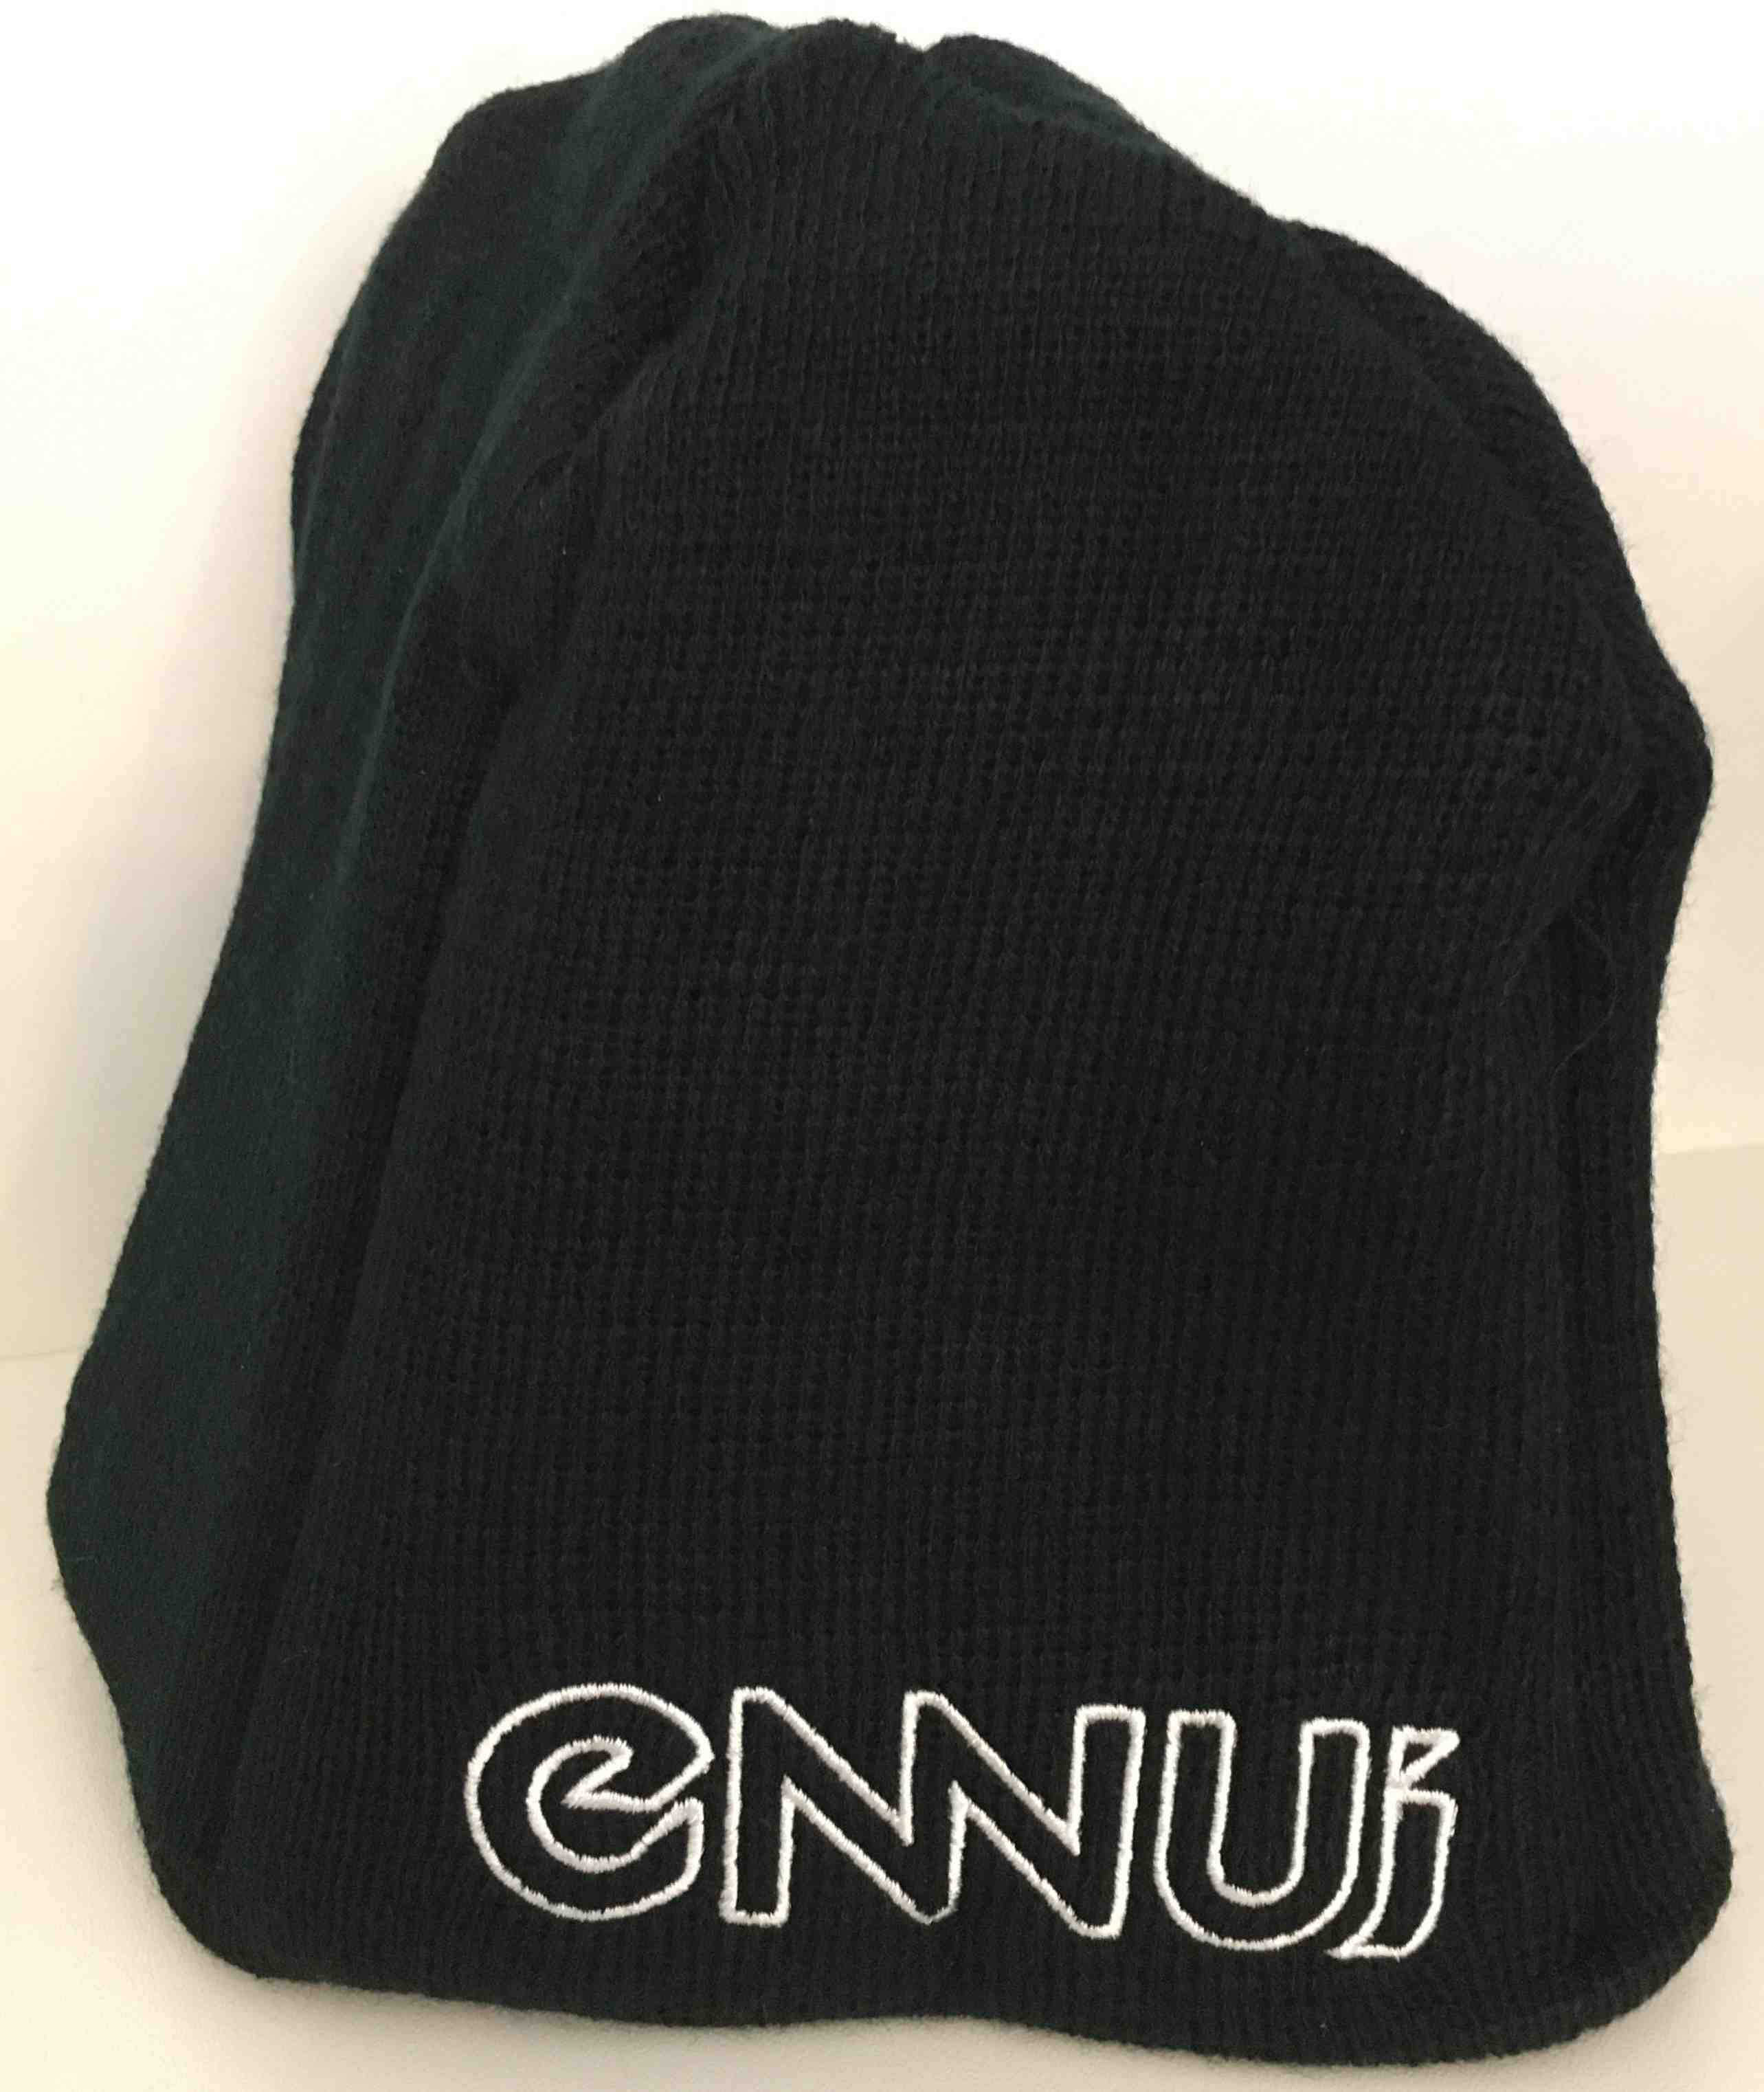 Ennui Street Beanie with protection inside